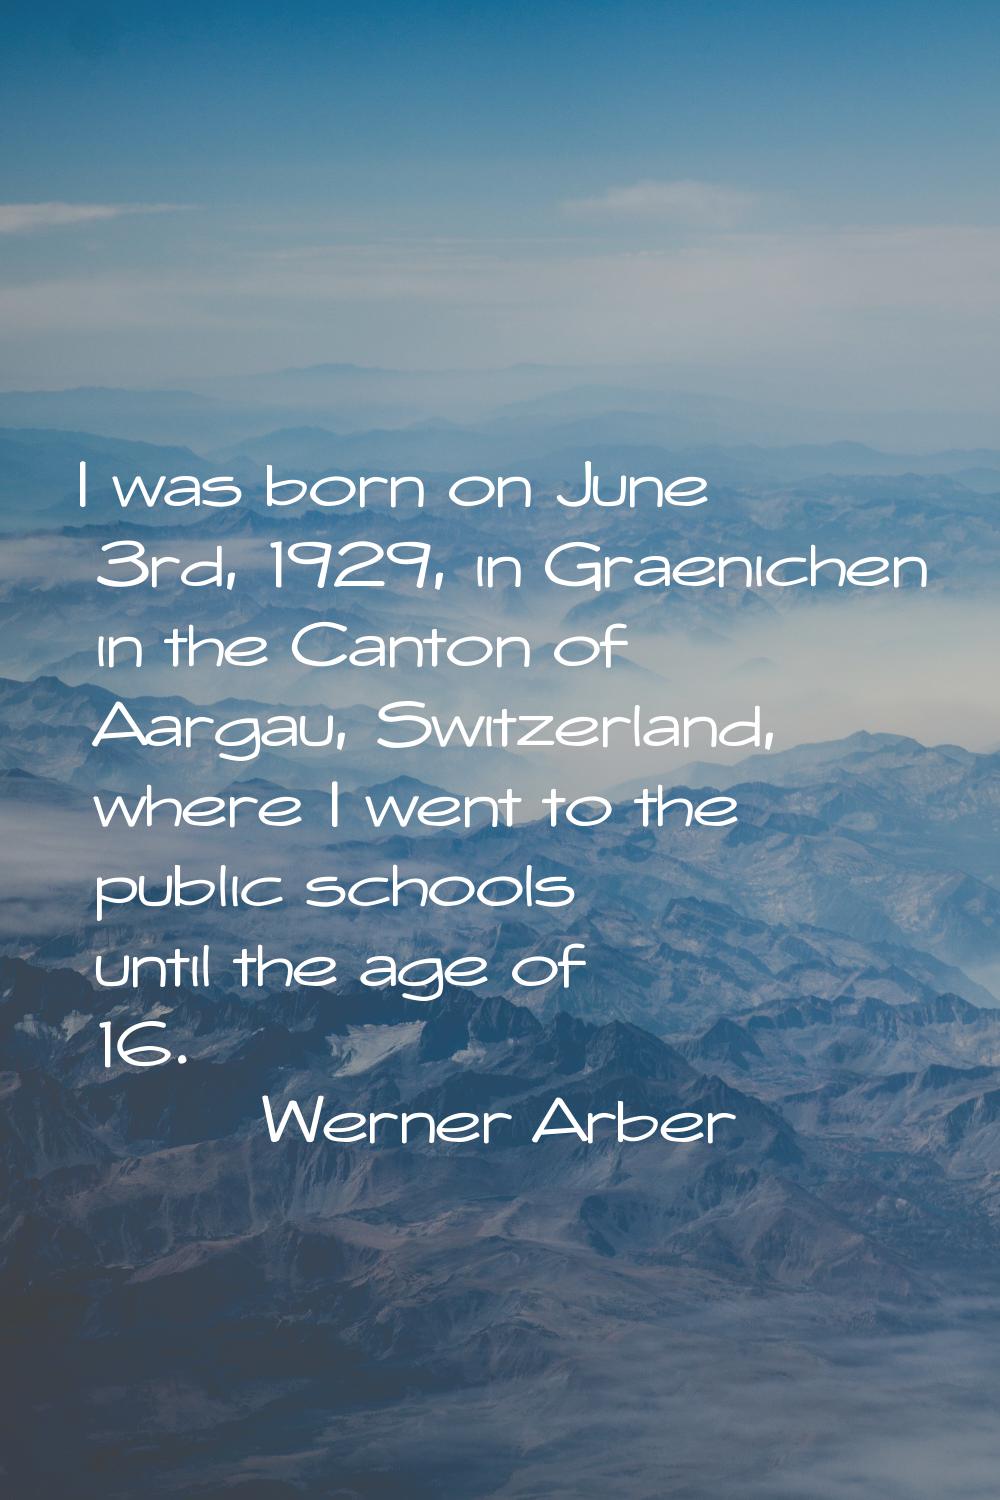 I was born on June 3rd, 1929, in Graenichen in the Canton of Aargau, Switzerland, where I went to t